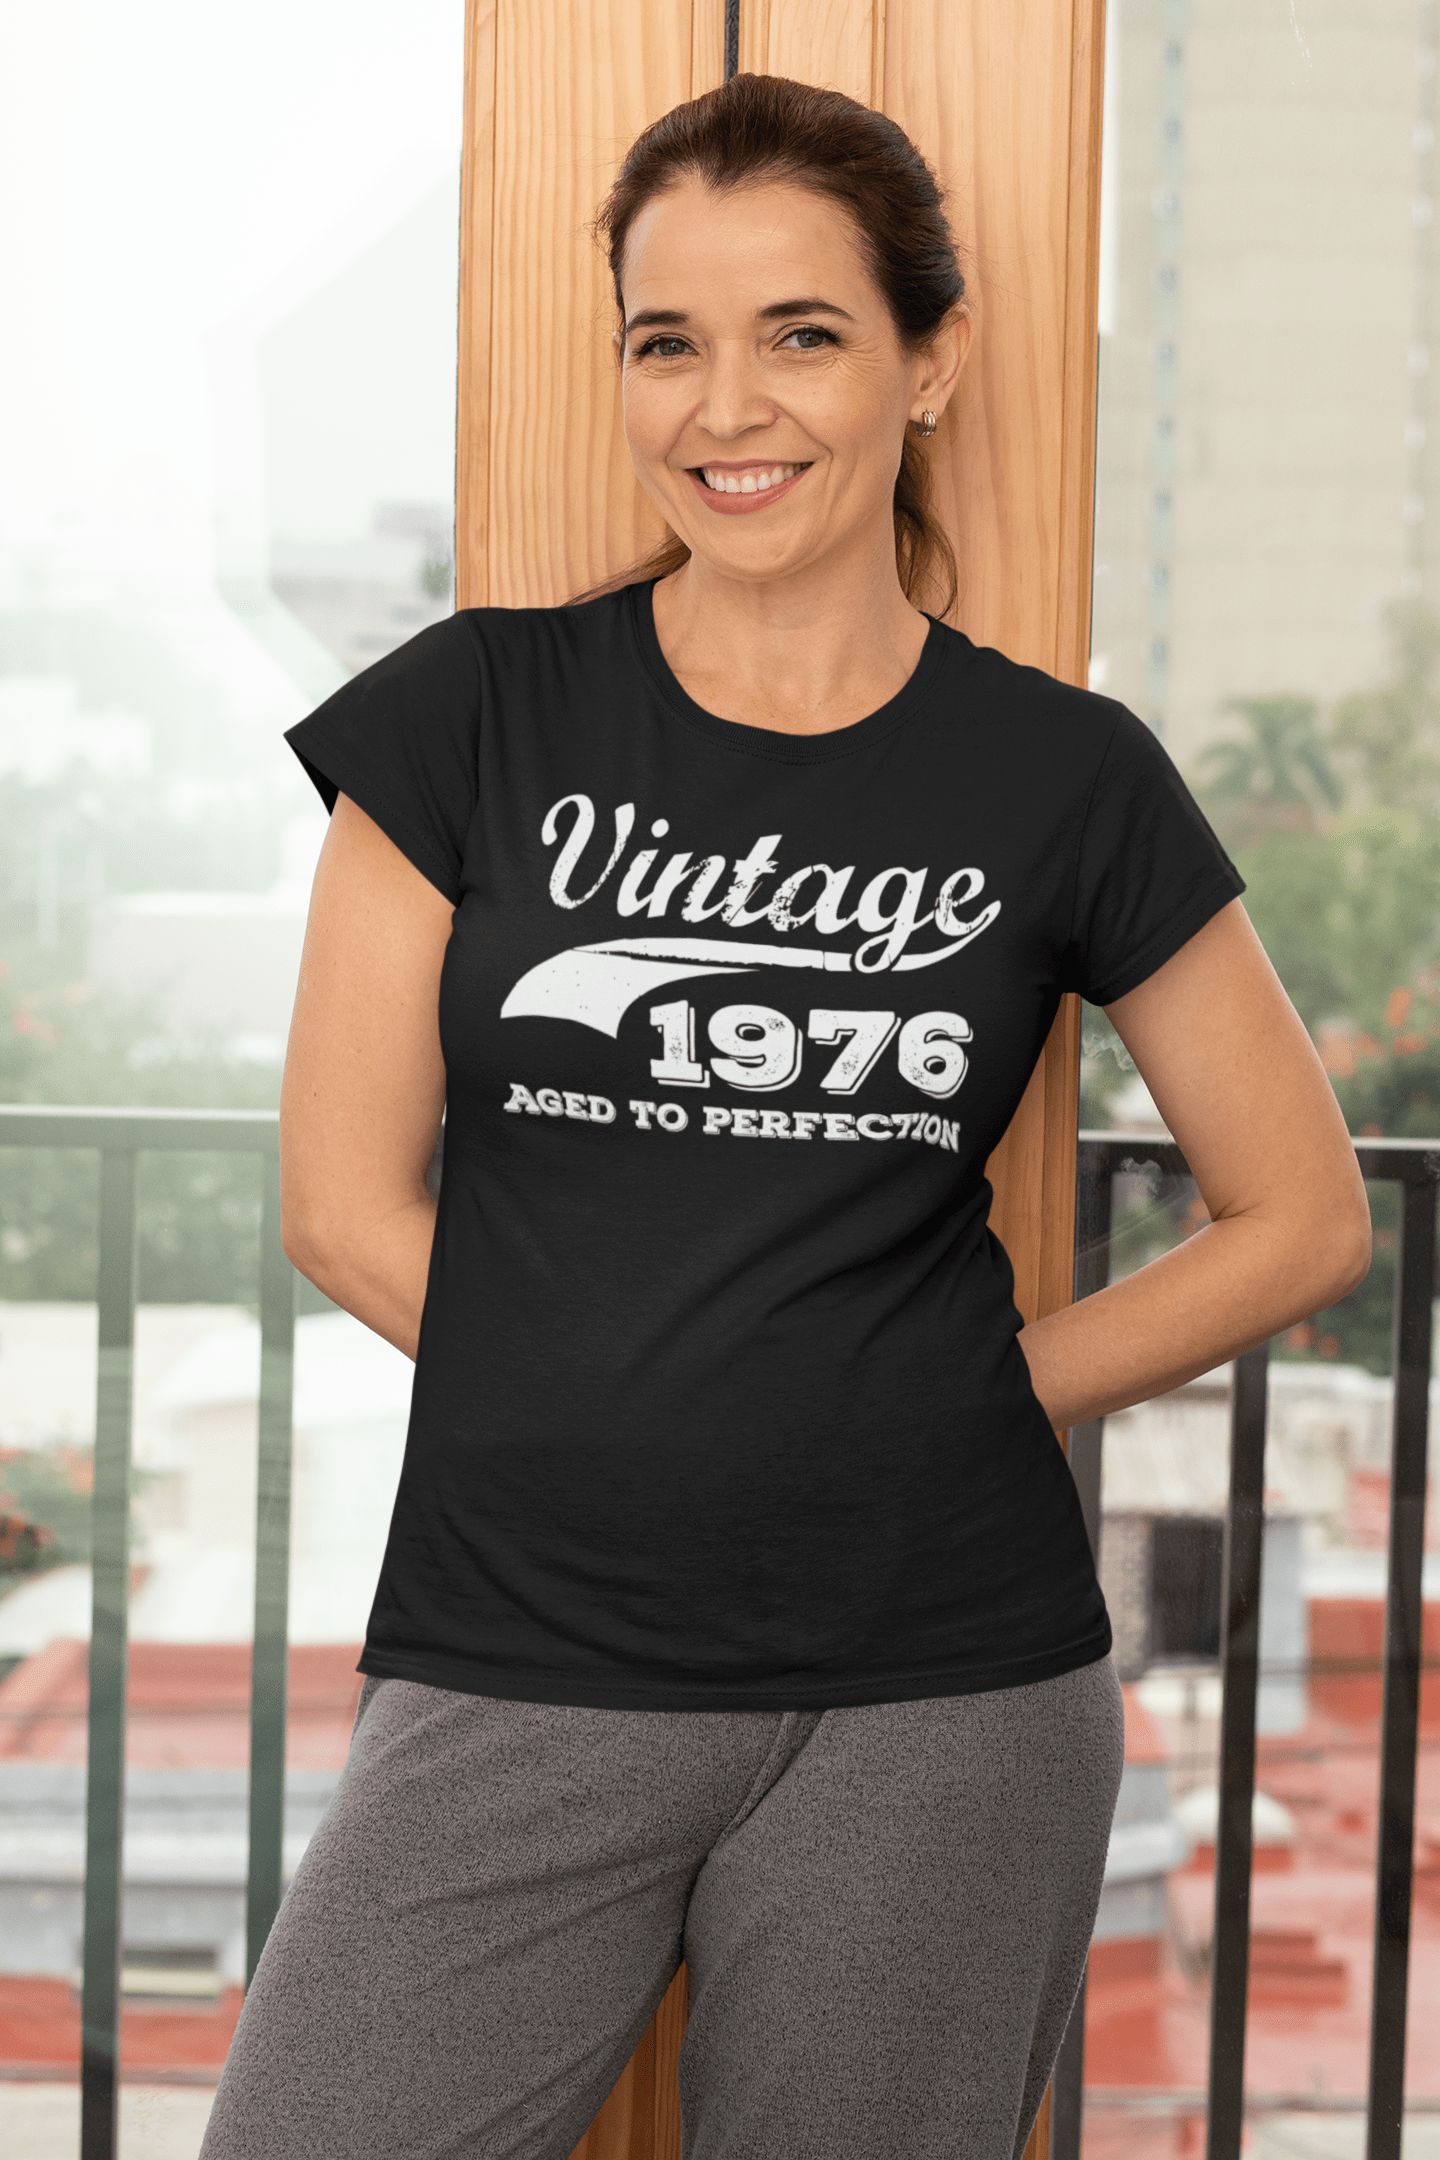 Vintage Aged to Perfection 1976, Black, Women's Short Sleeve Round Neck T-shirt, gift t-shirt 00345